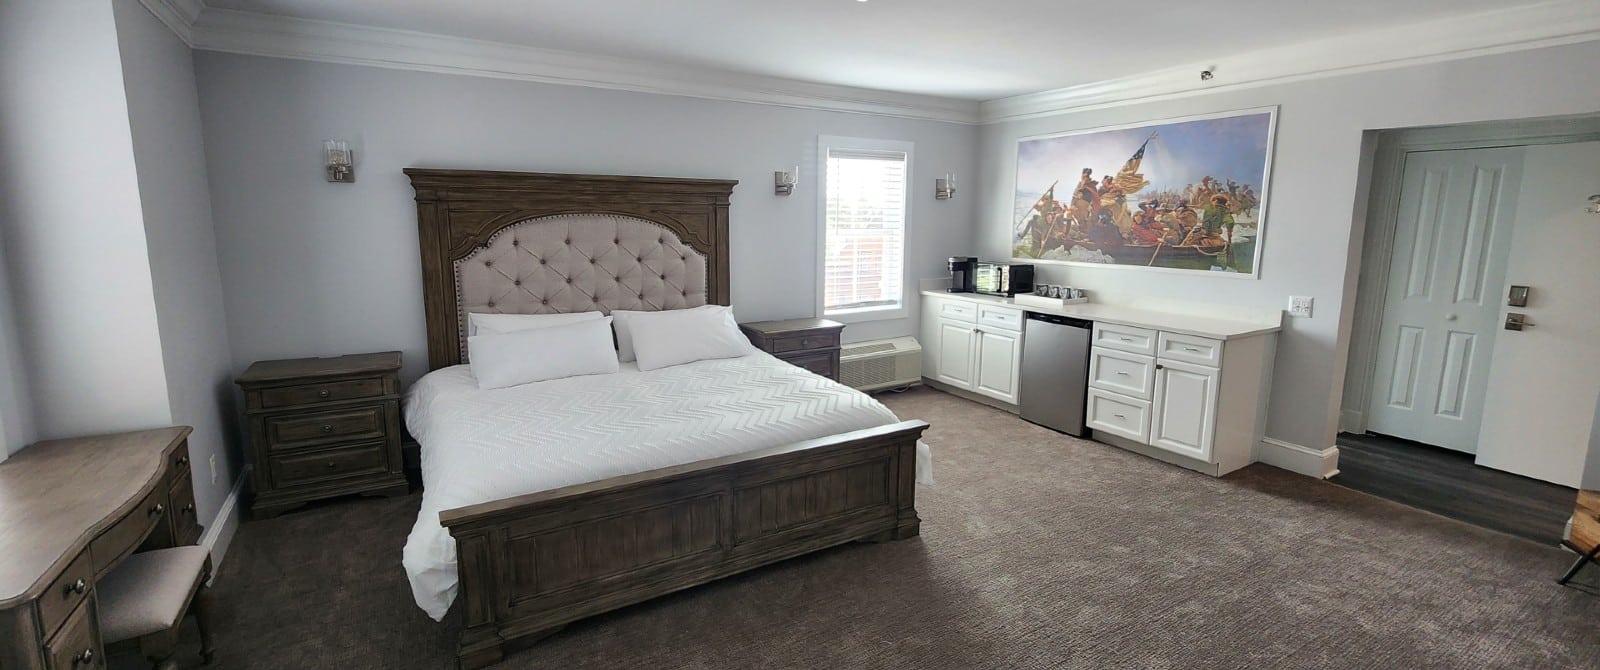 Spacious bedroom with king bed, kitchenette counter, two side tables and writing desk with stool